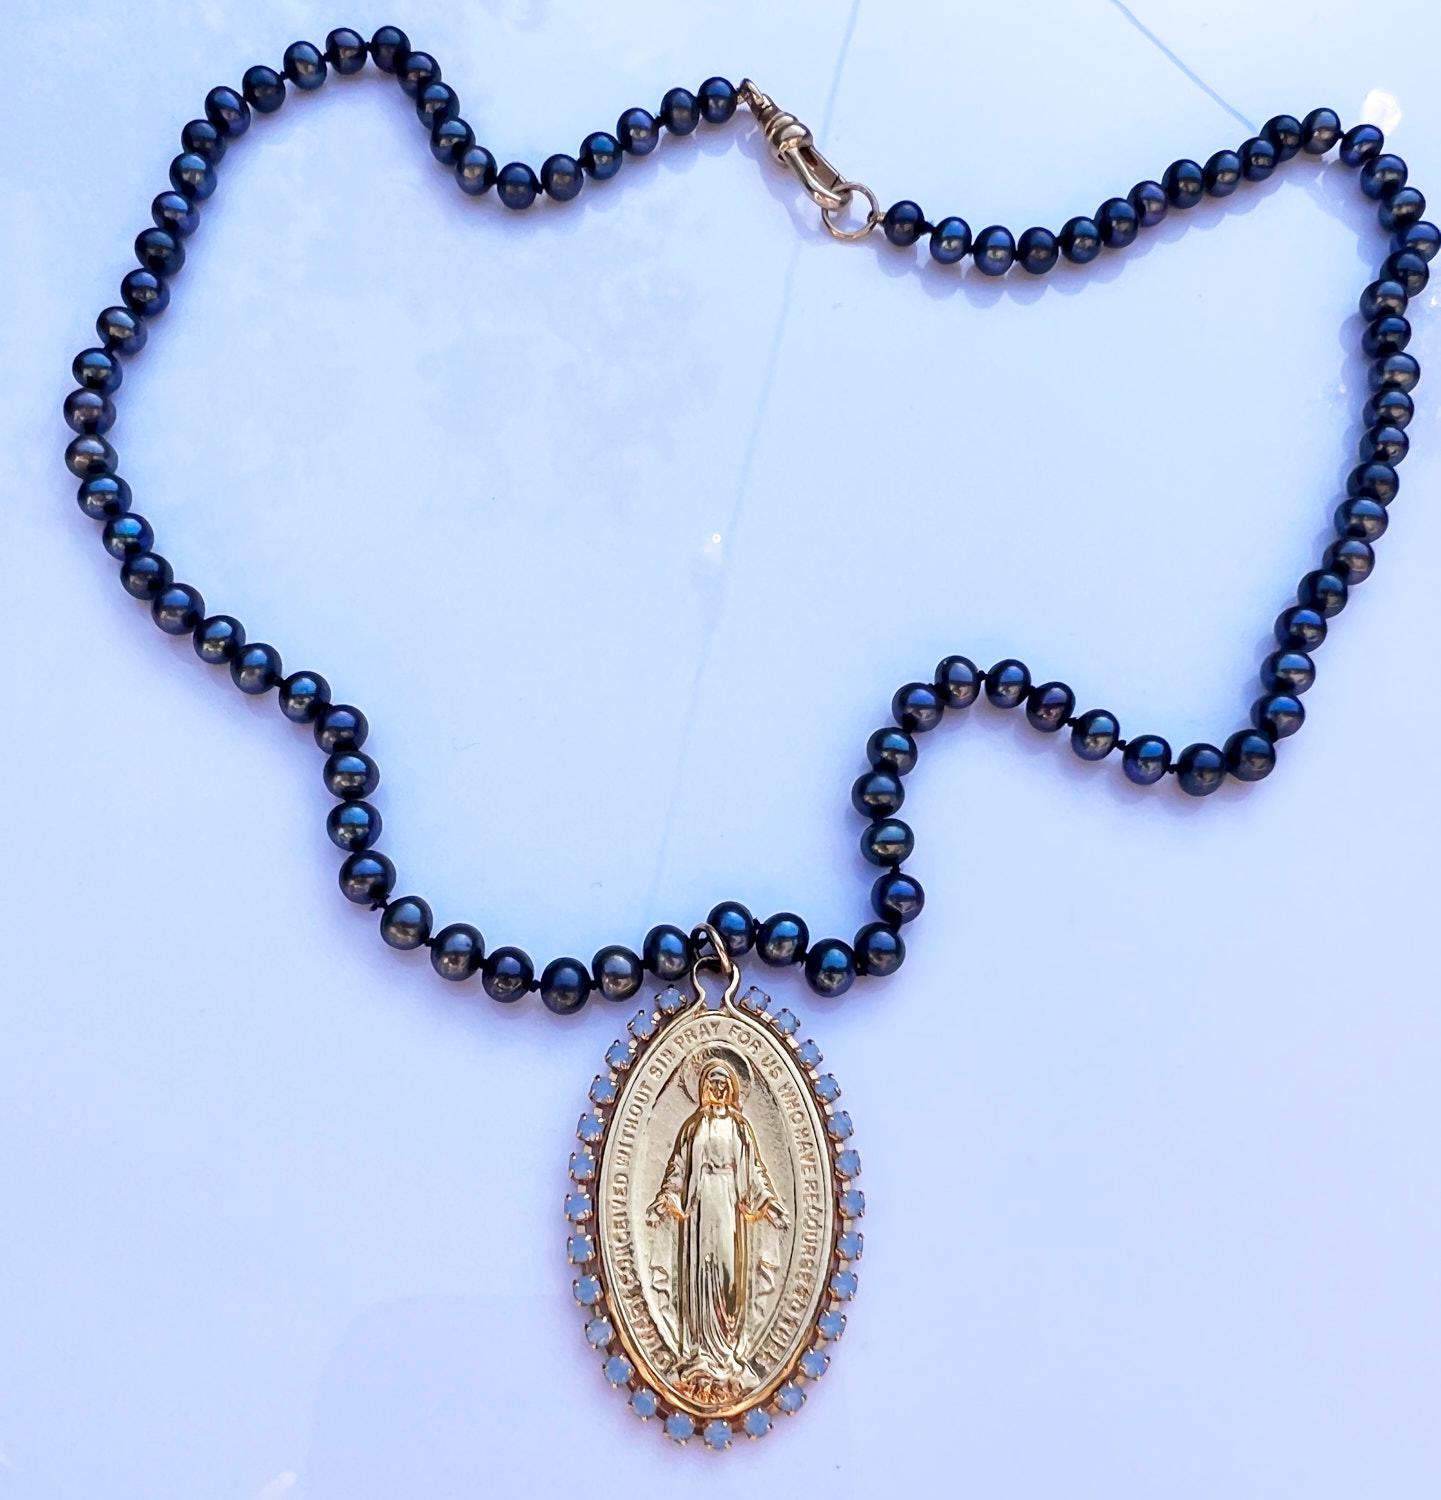 Bead Crystal Virgin Mary Medal Black Pearl Necklace Choker J Dauphin For Sale